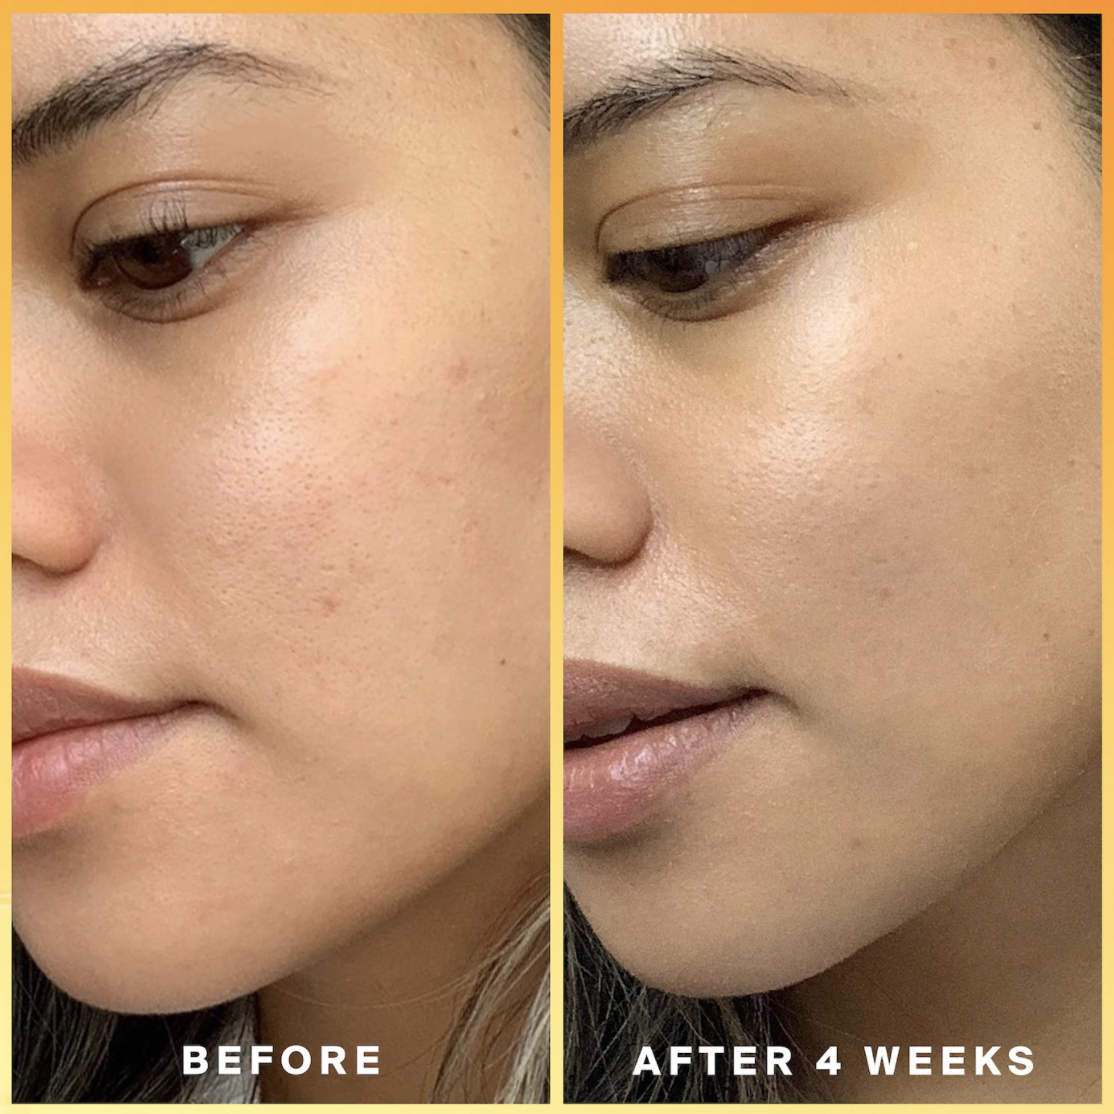 model before and after shot showing a more evened-out complexion after four weeks